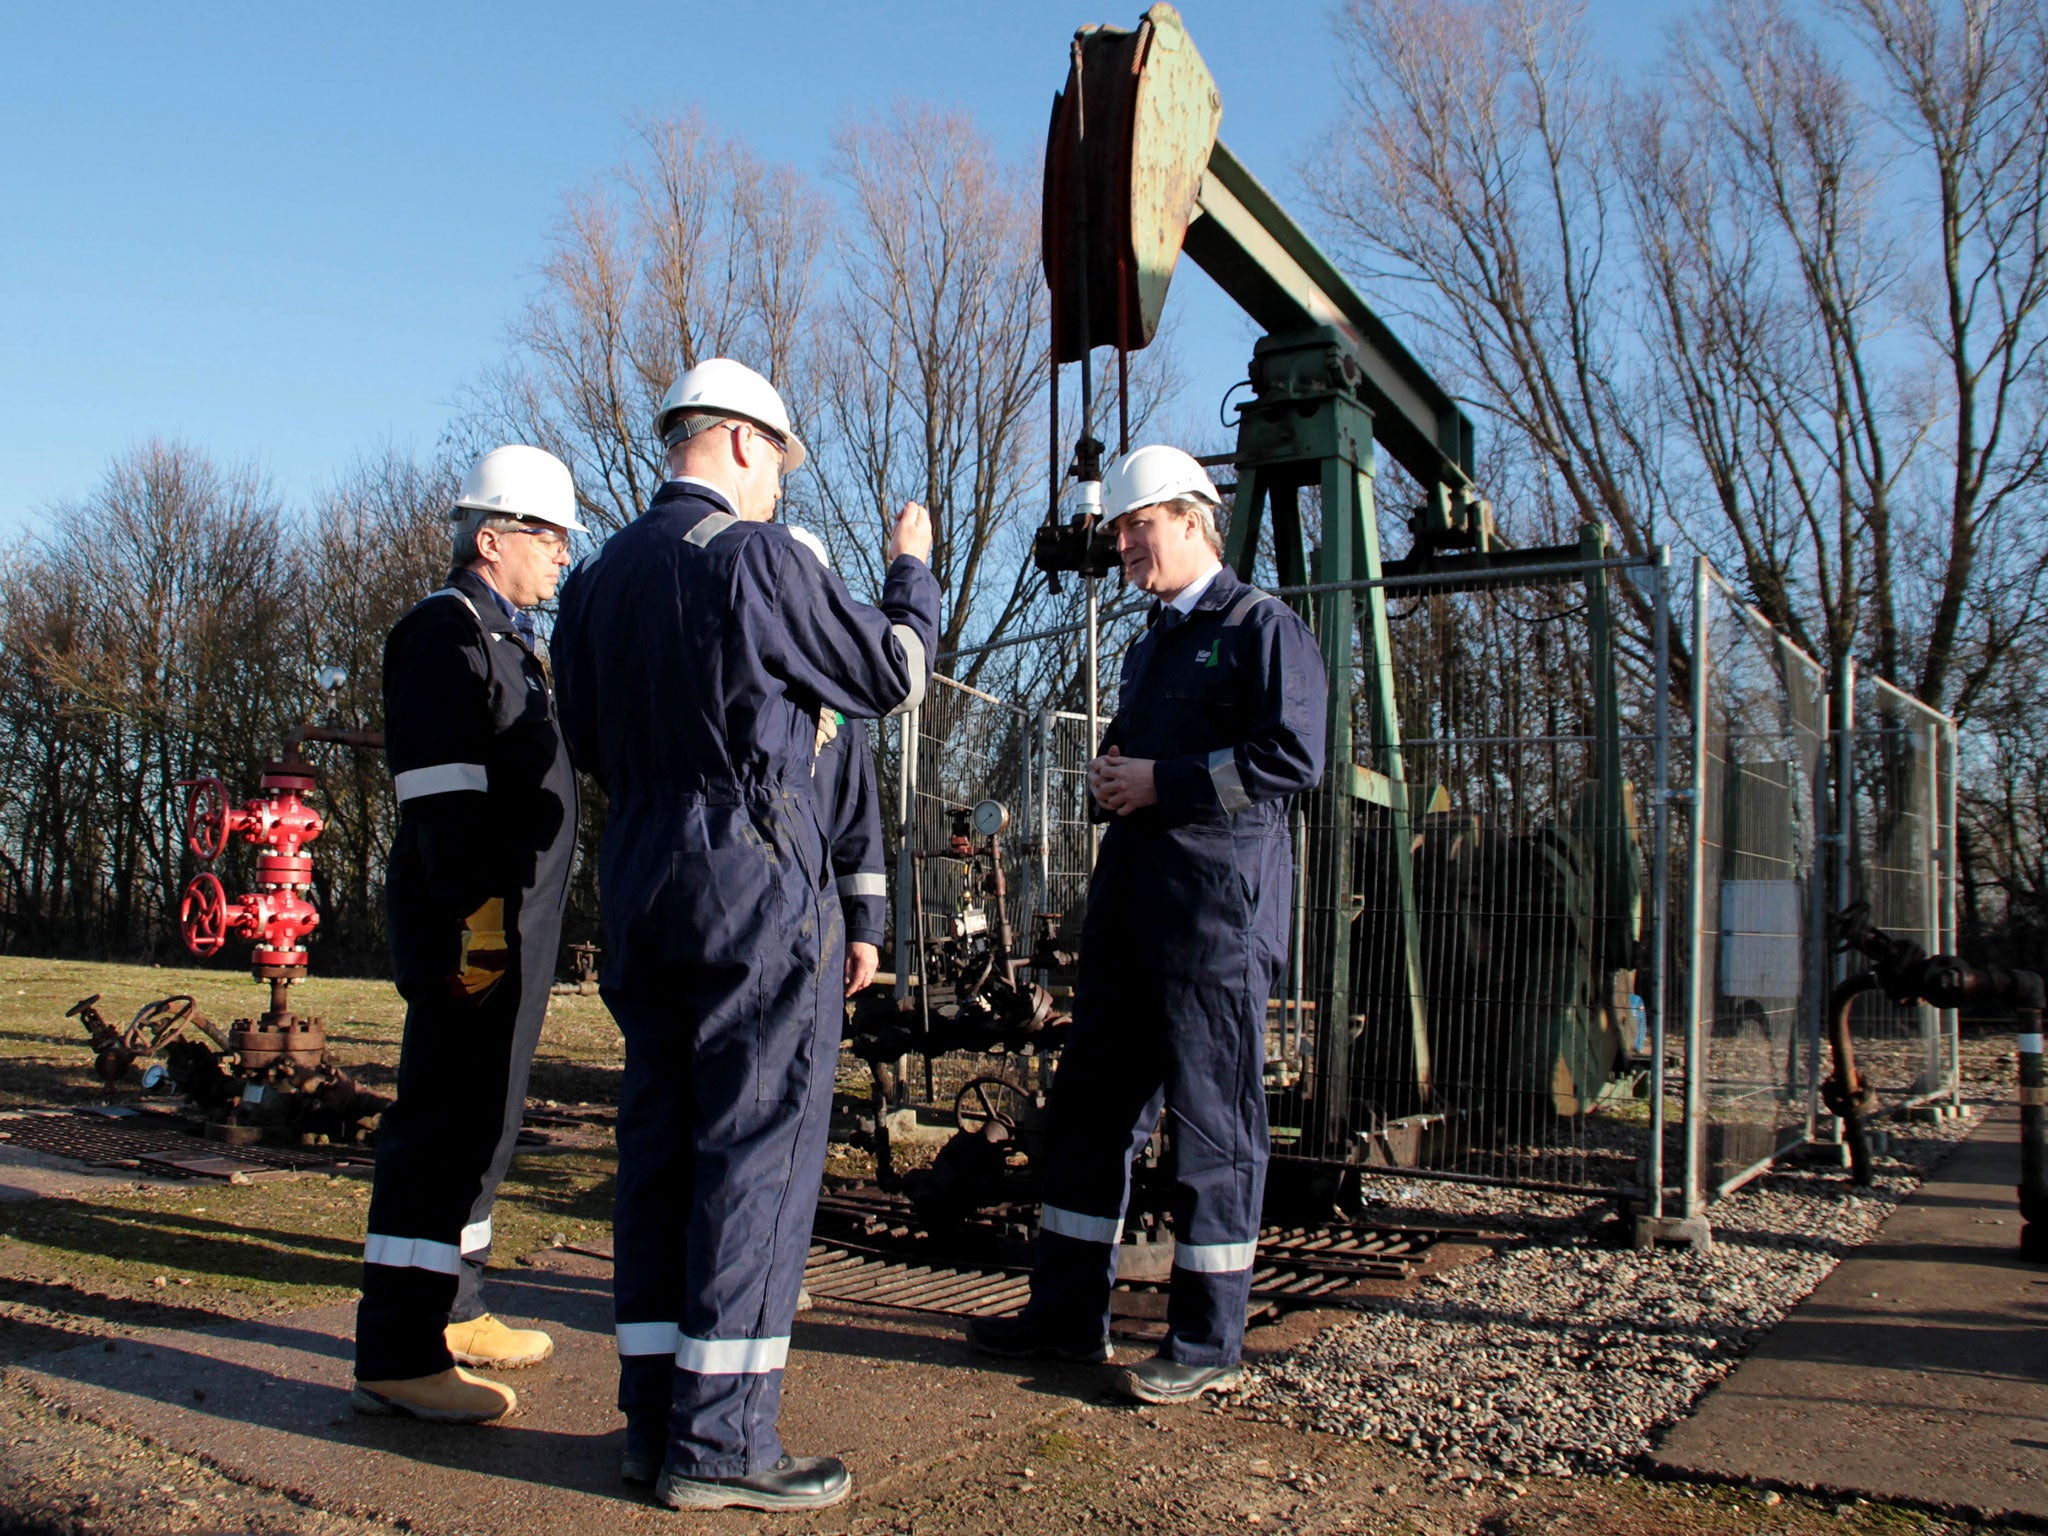 David Cameron visits the Total Oil Depot shale drilling site in Gainsborough, Lincolnshire. MPs have accused the government of seeking to bribe local councils to grant planning permission for controversial fracking projects